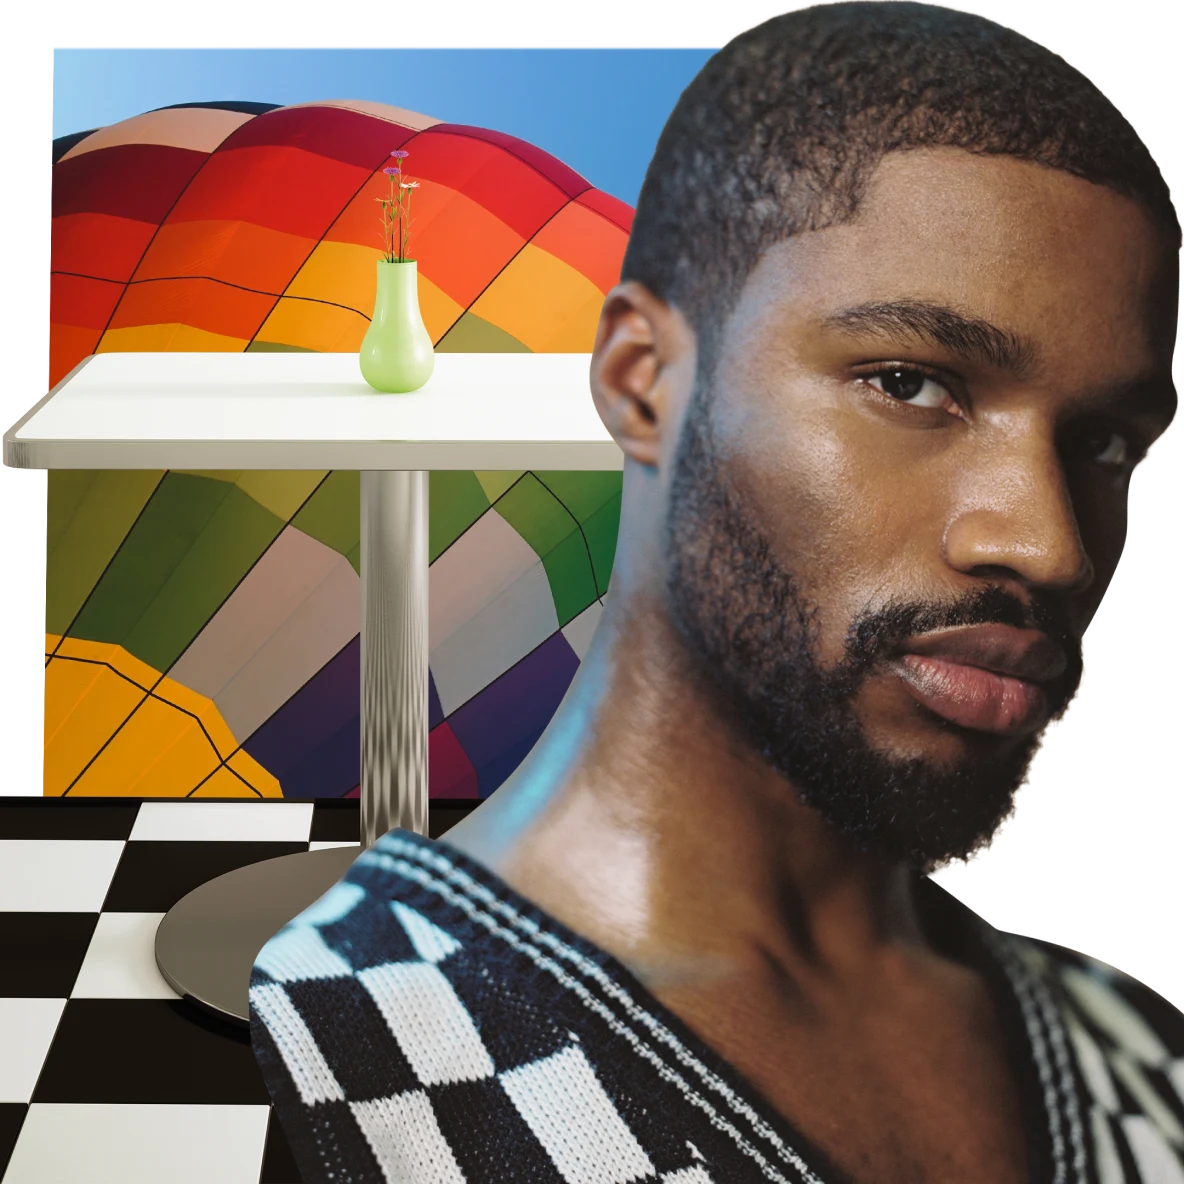 Black man with short hair in a checkered V-neck sweater looks at the camera. White table with a thin green vase on top. Rainbow helium balloon in the background.